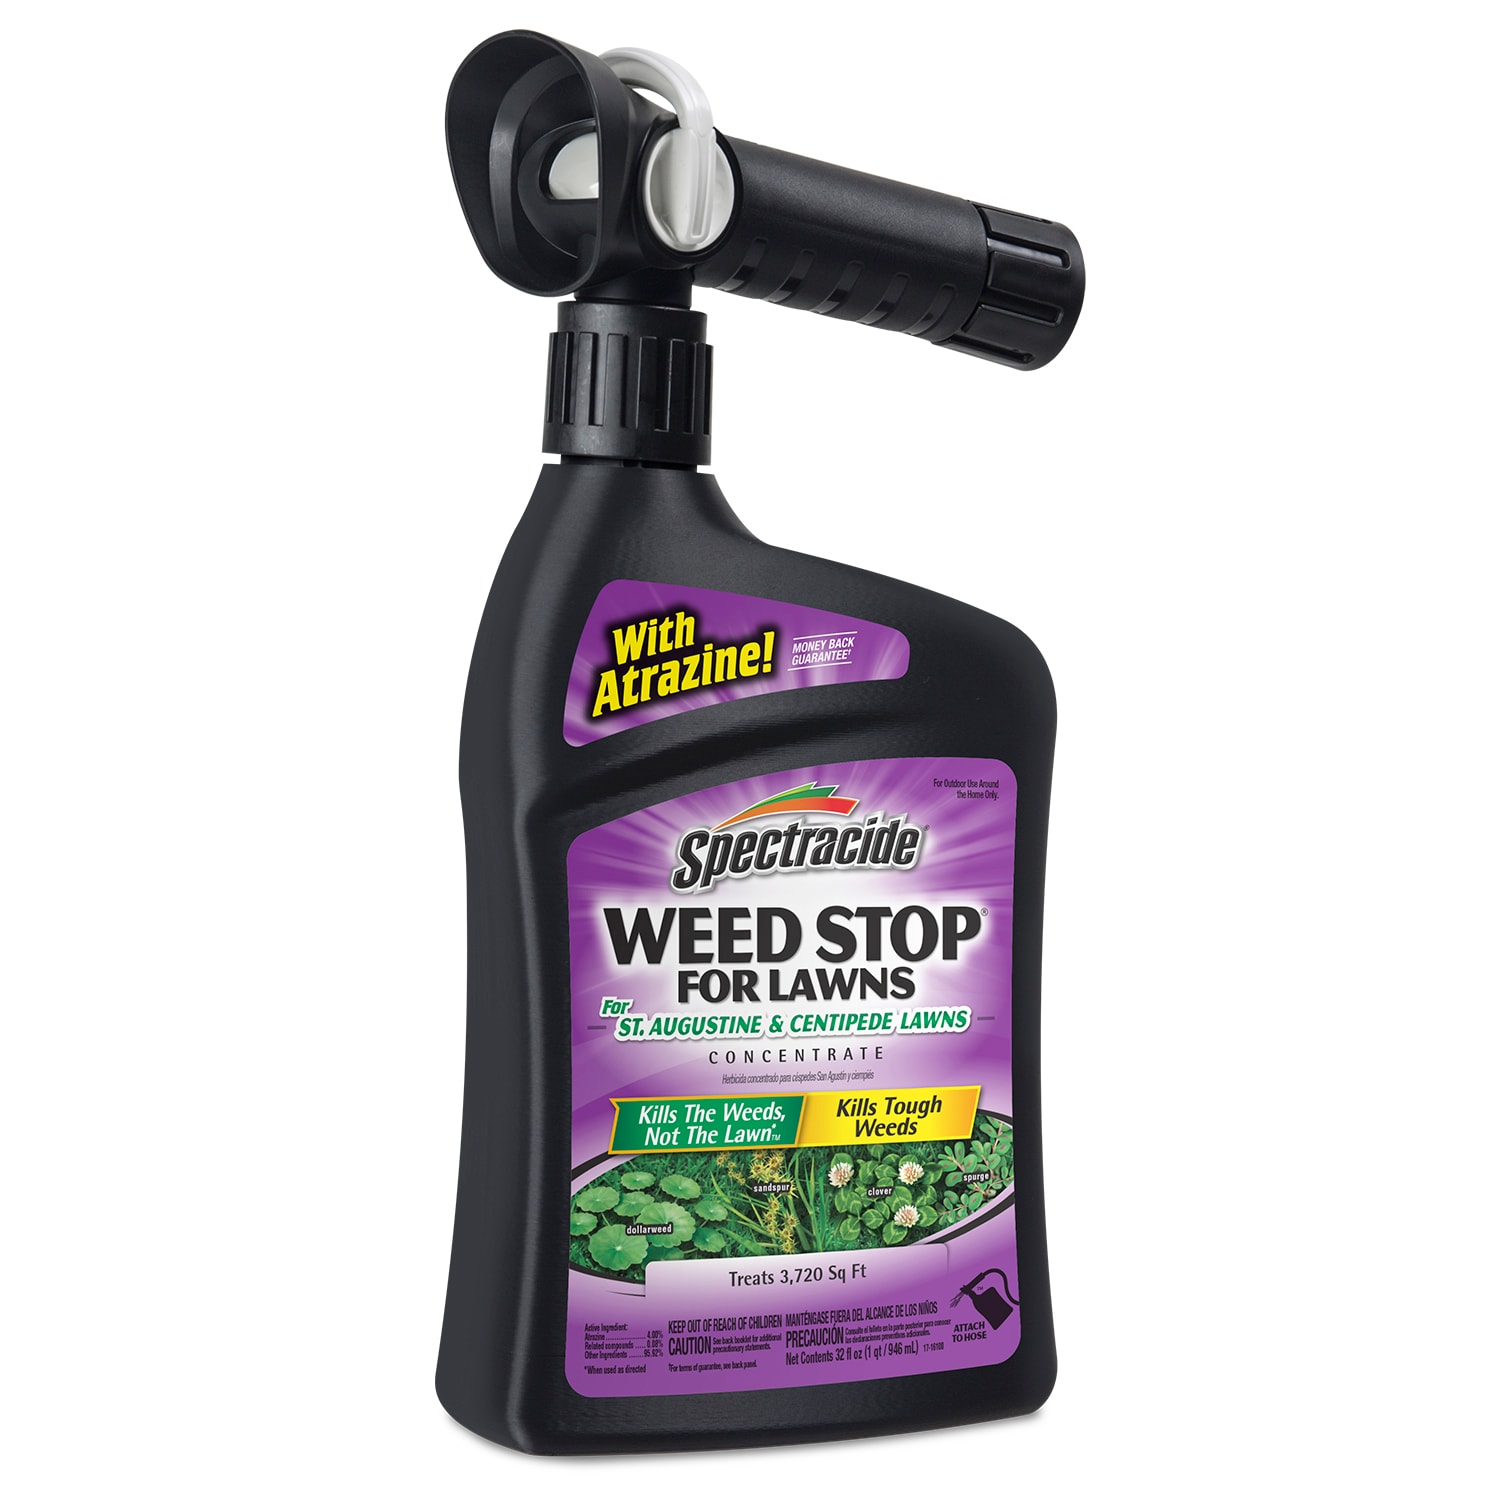 Spectracide Weed Stop Lawns for Weed the St. in Killers End department 32-oz Weed Augustine Hose Sprayer Lawn Centipede and at Killer